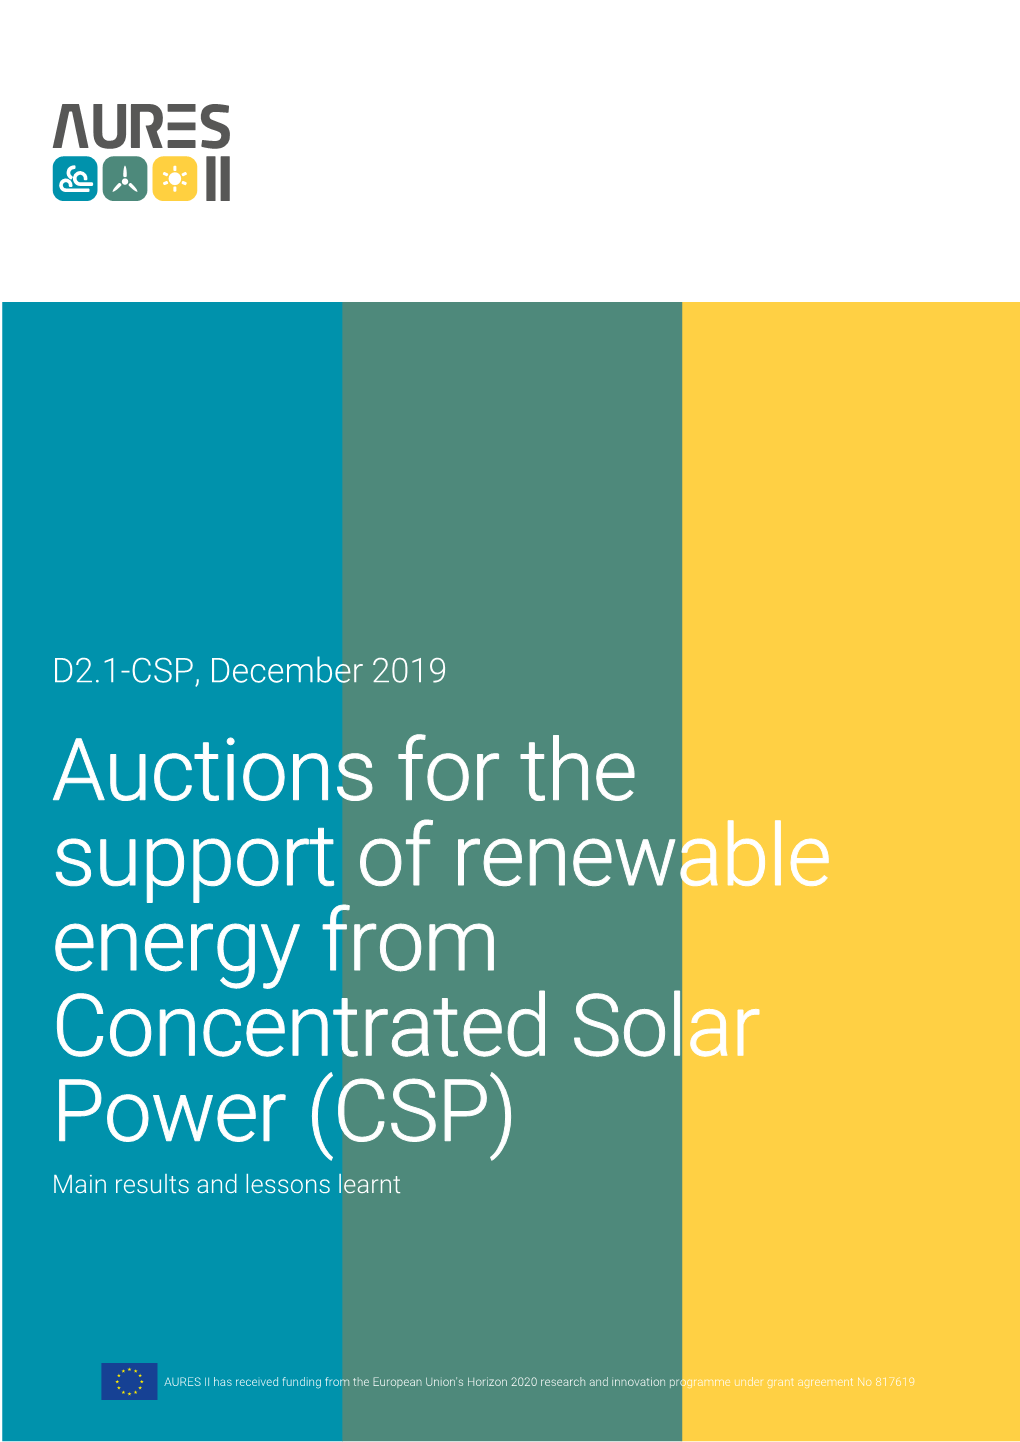 Auctions for the Support of Renewable Energy from Concentrated Solar Power (CSP) Main Results and Lessons Learnt